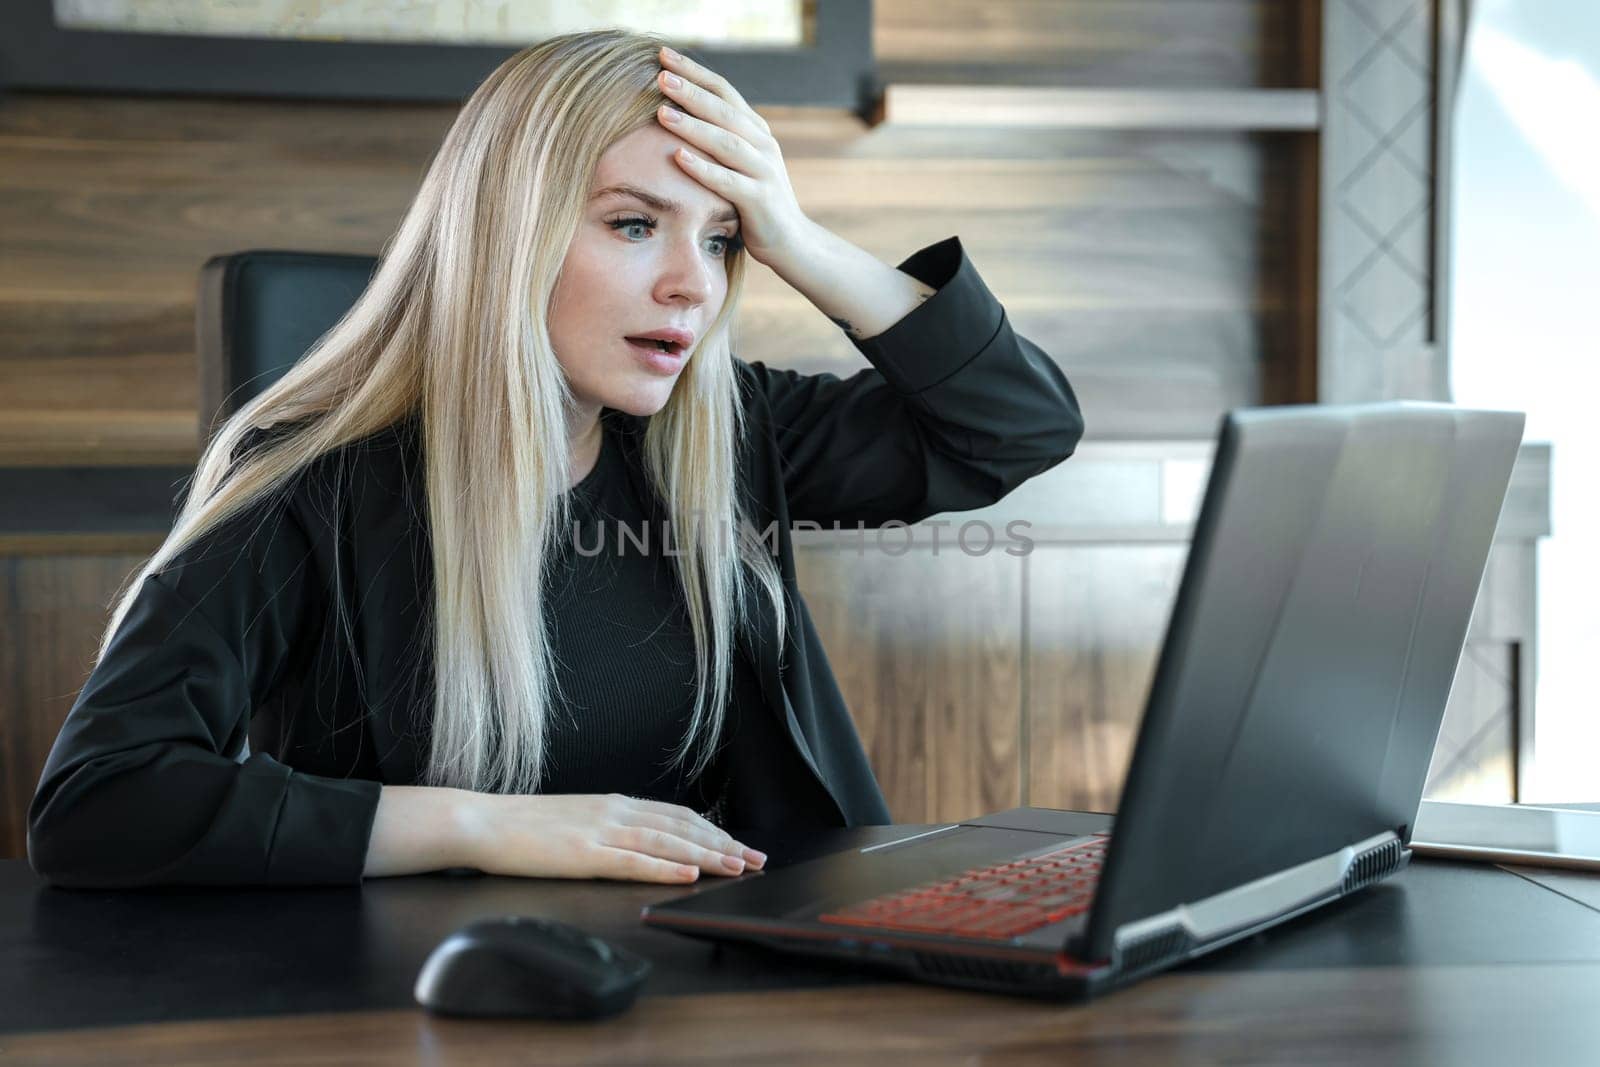 Woman with frightened expression looks at laptop screen, clutching her forehead with her hand in surprise